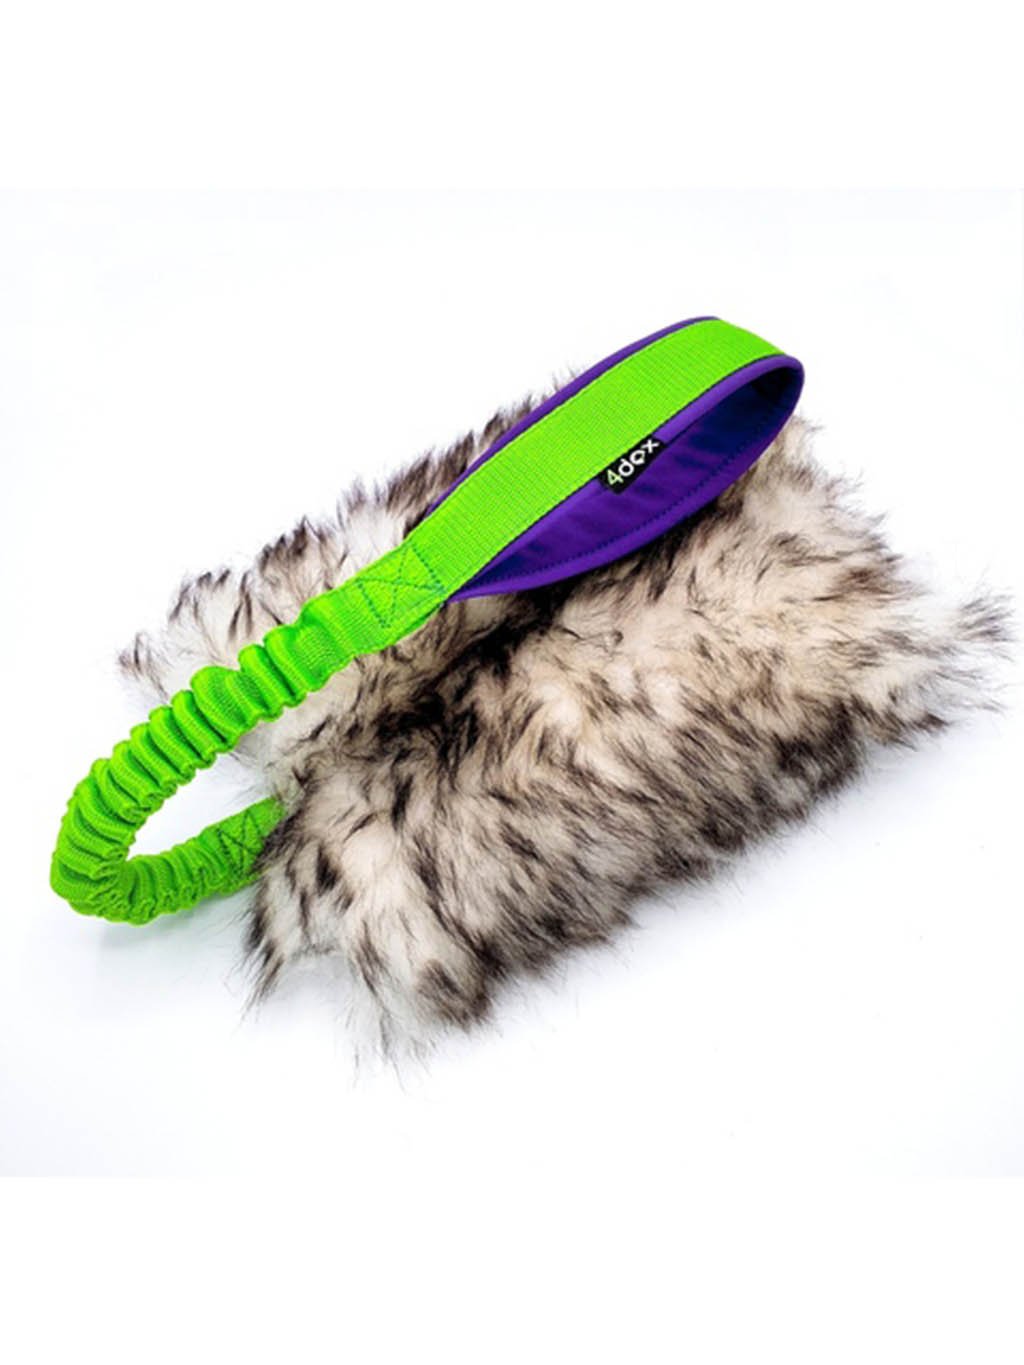 Sheepskin drag with shock absorber size L lime 4dox